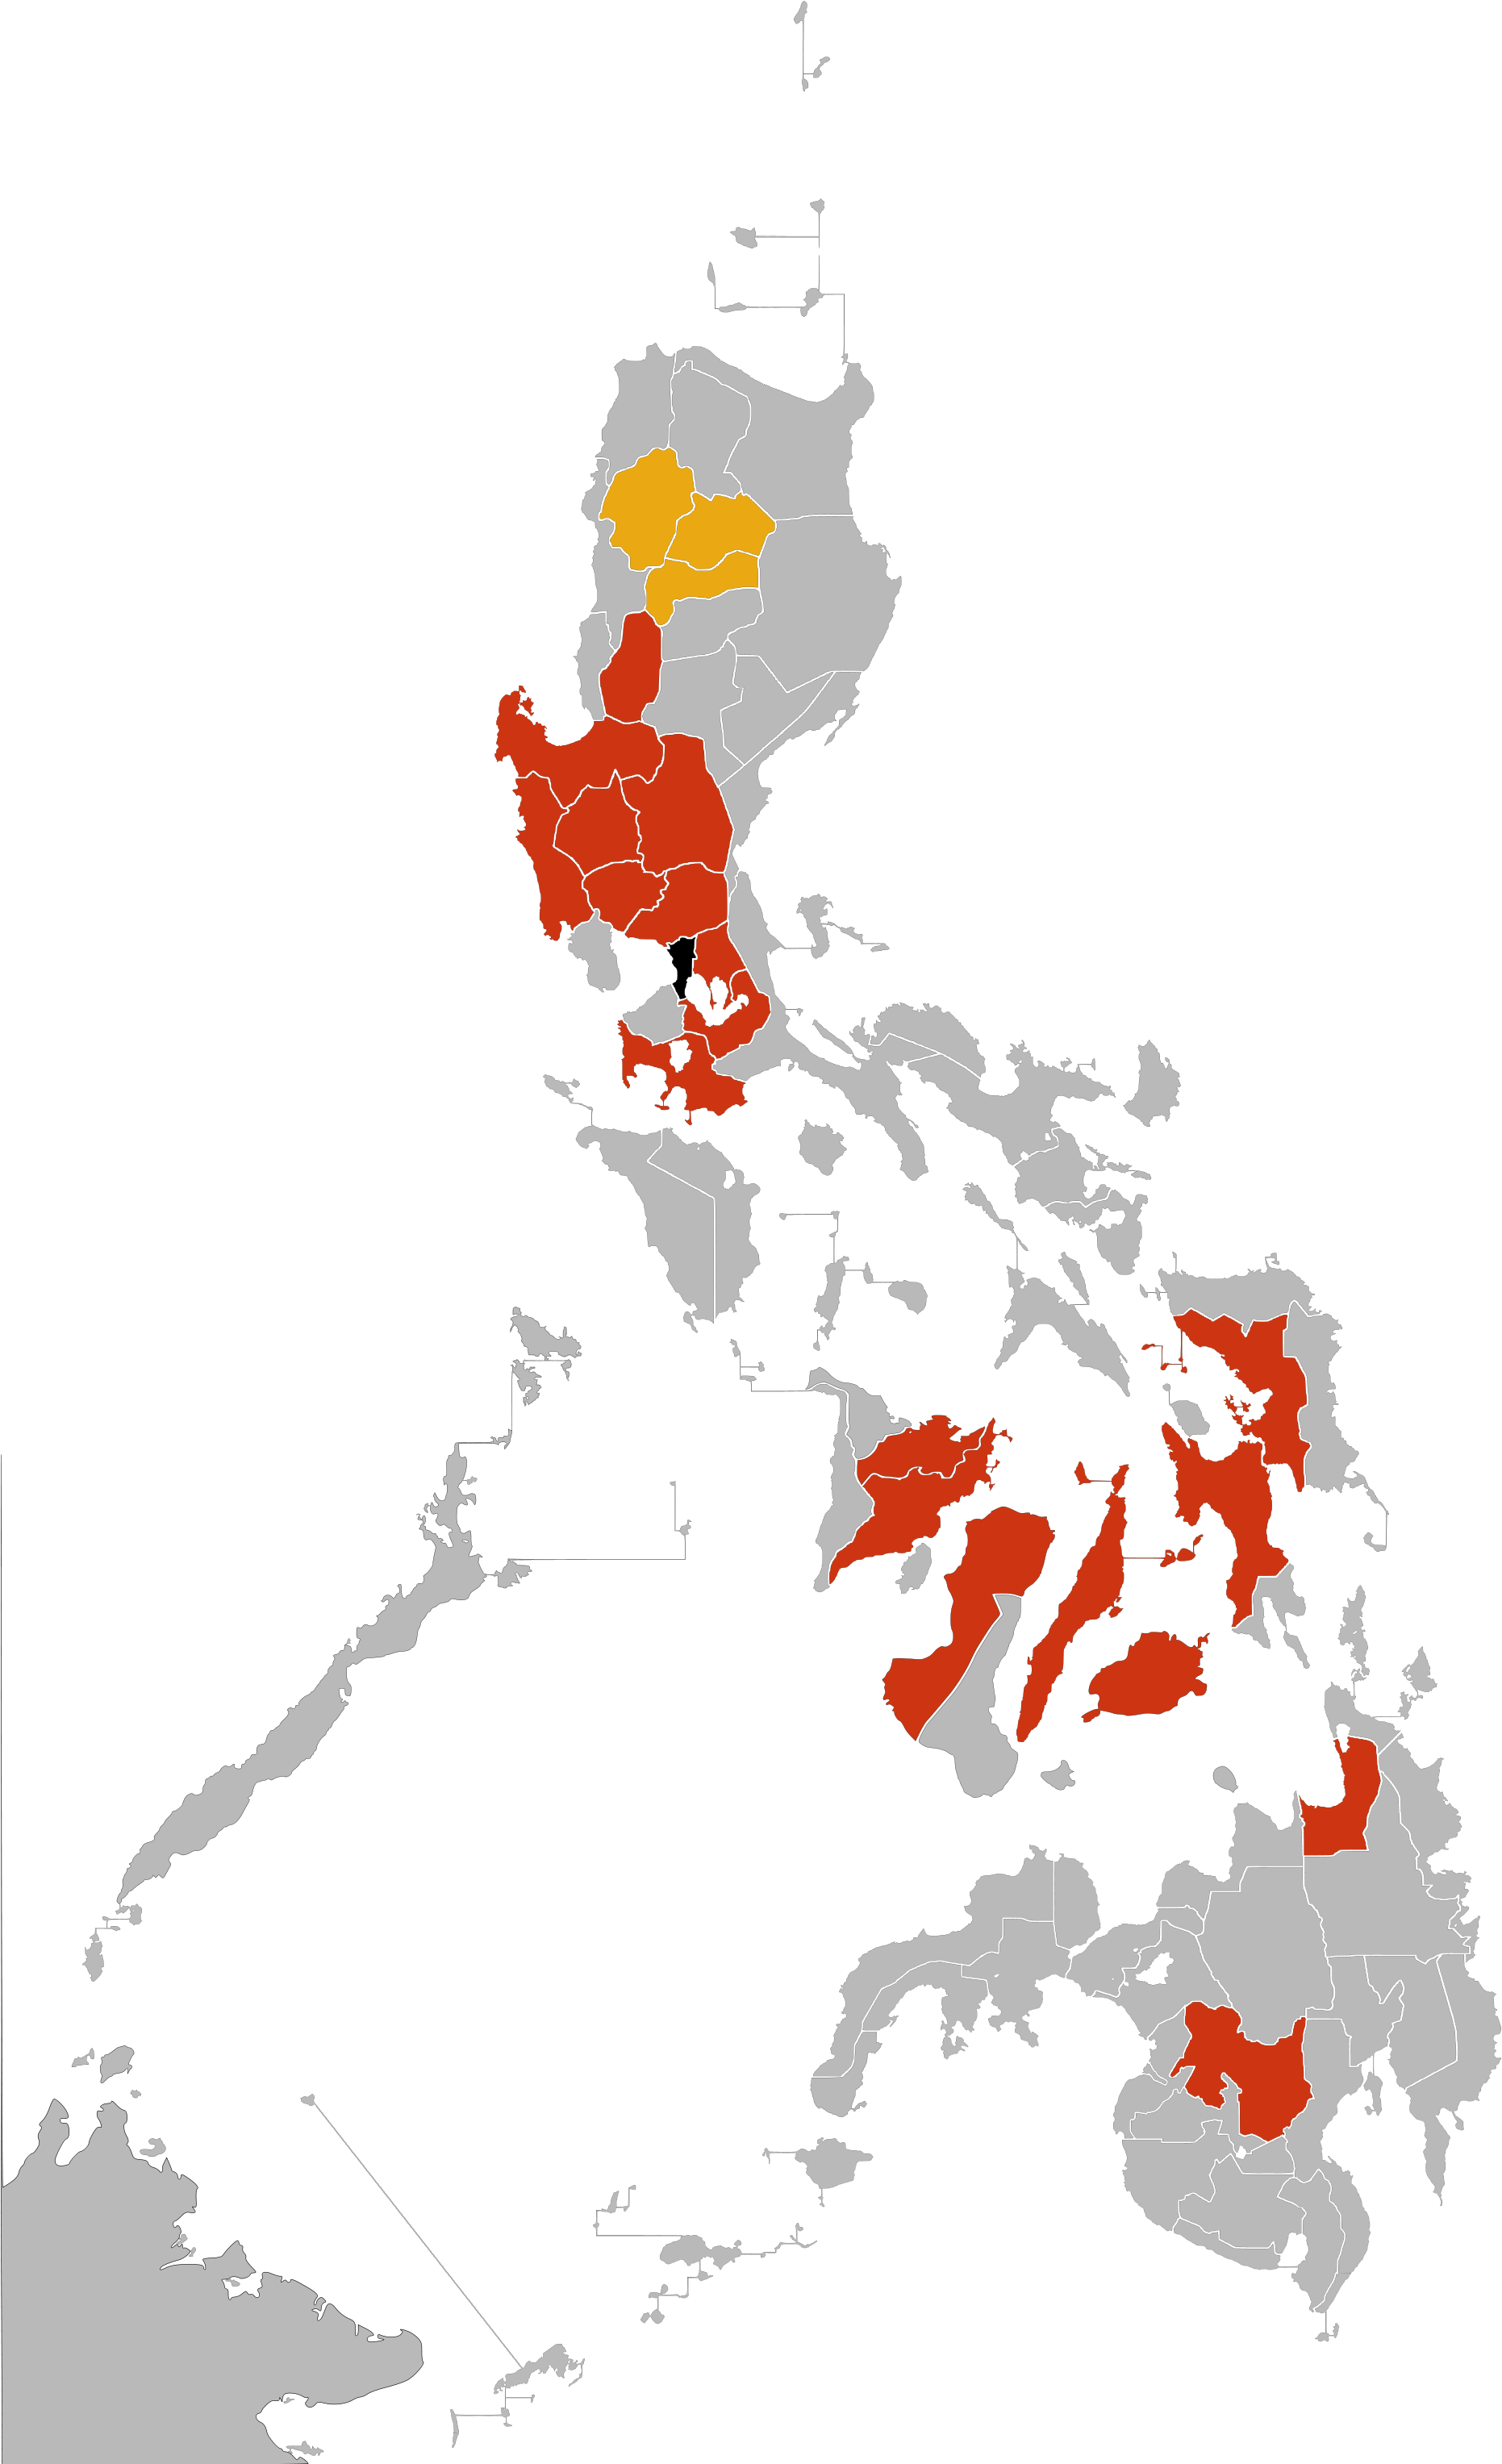 Philippines Map Color Coded Regions